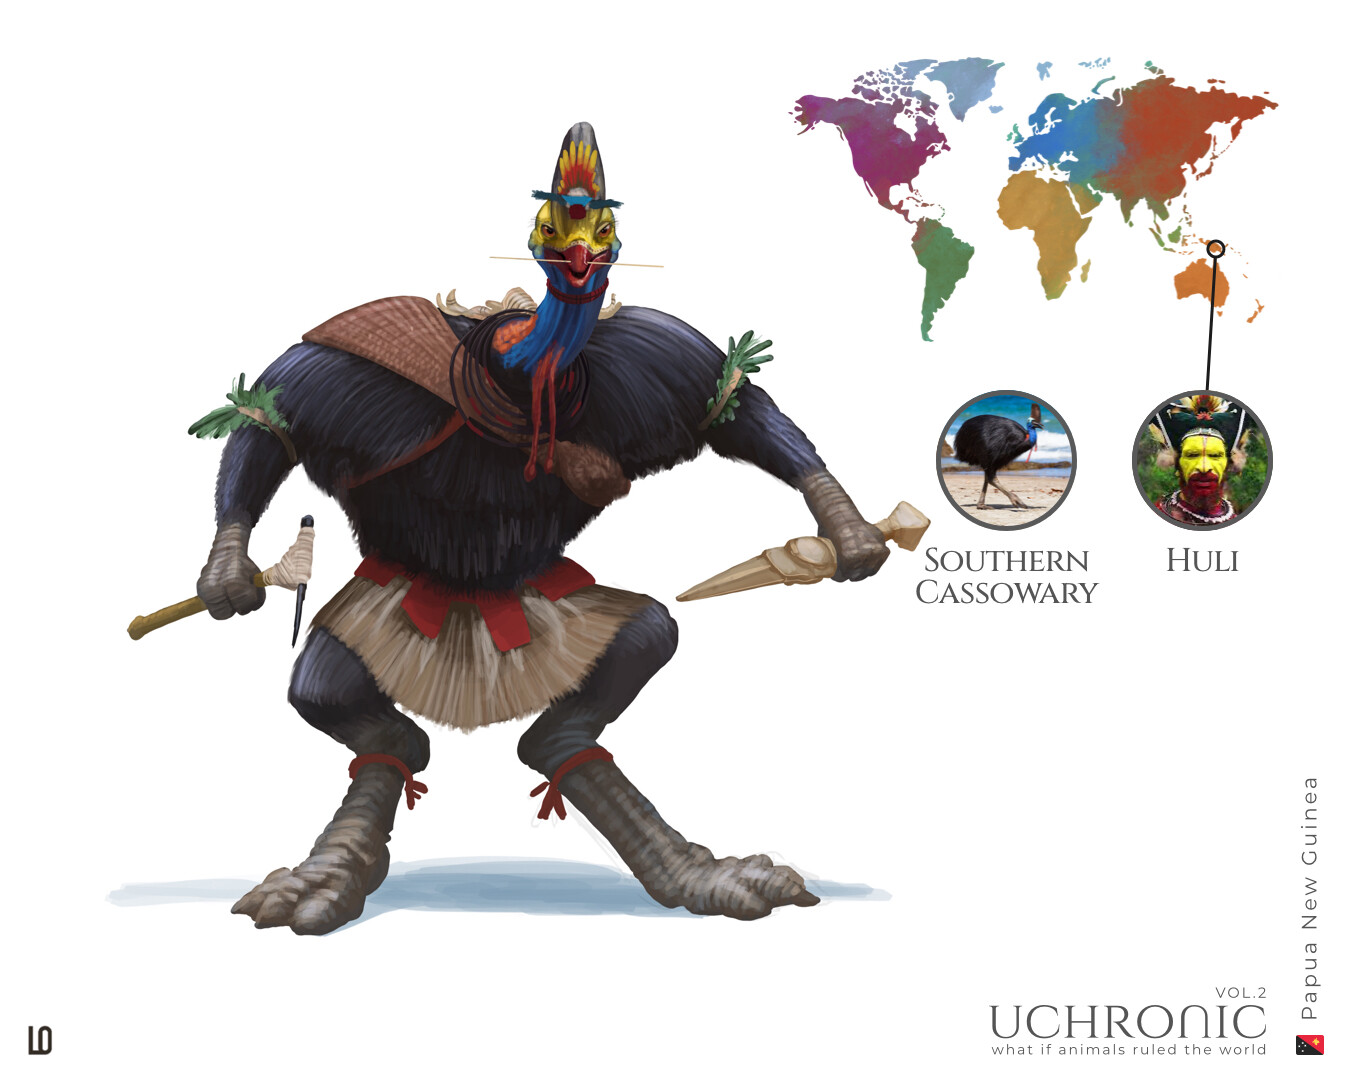 Huli, as a Southern Cassowary , they was the first antecesor of one of the most important tribes in Papua New Guinea.